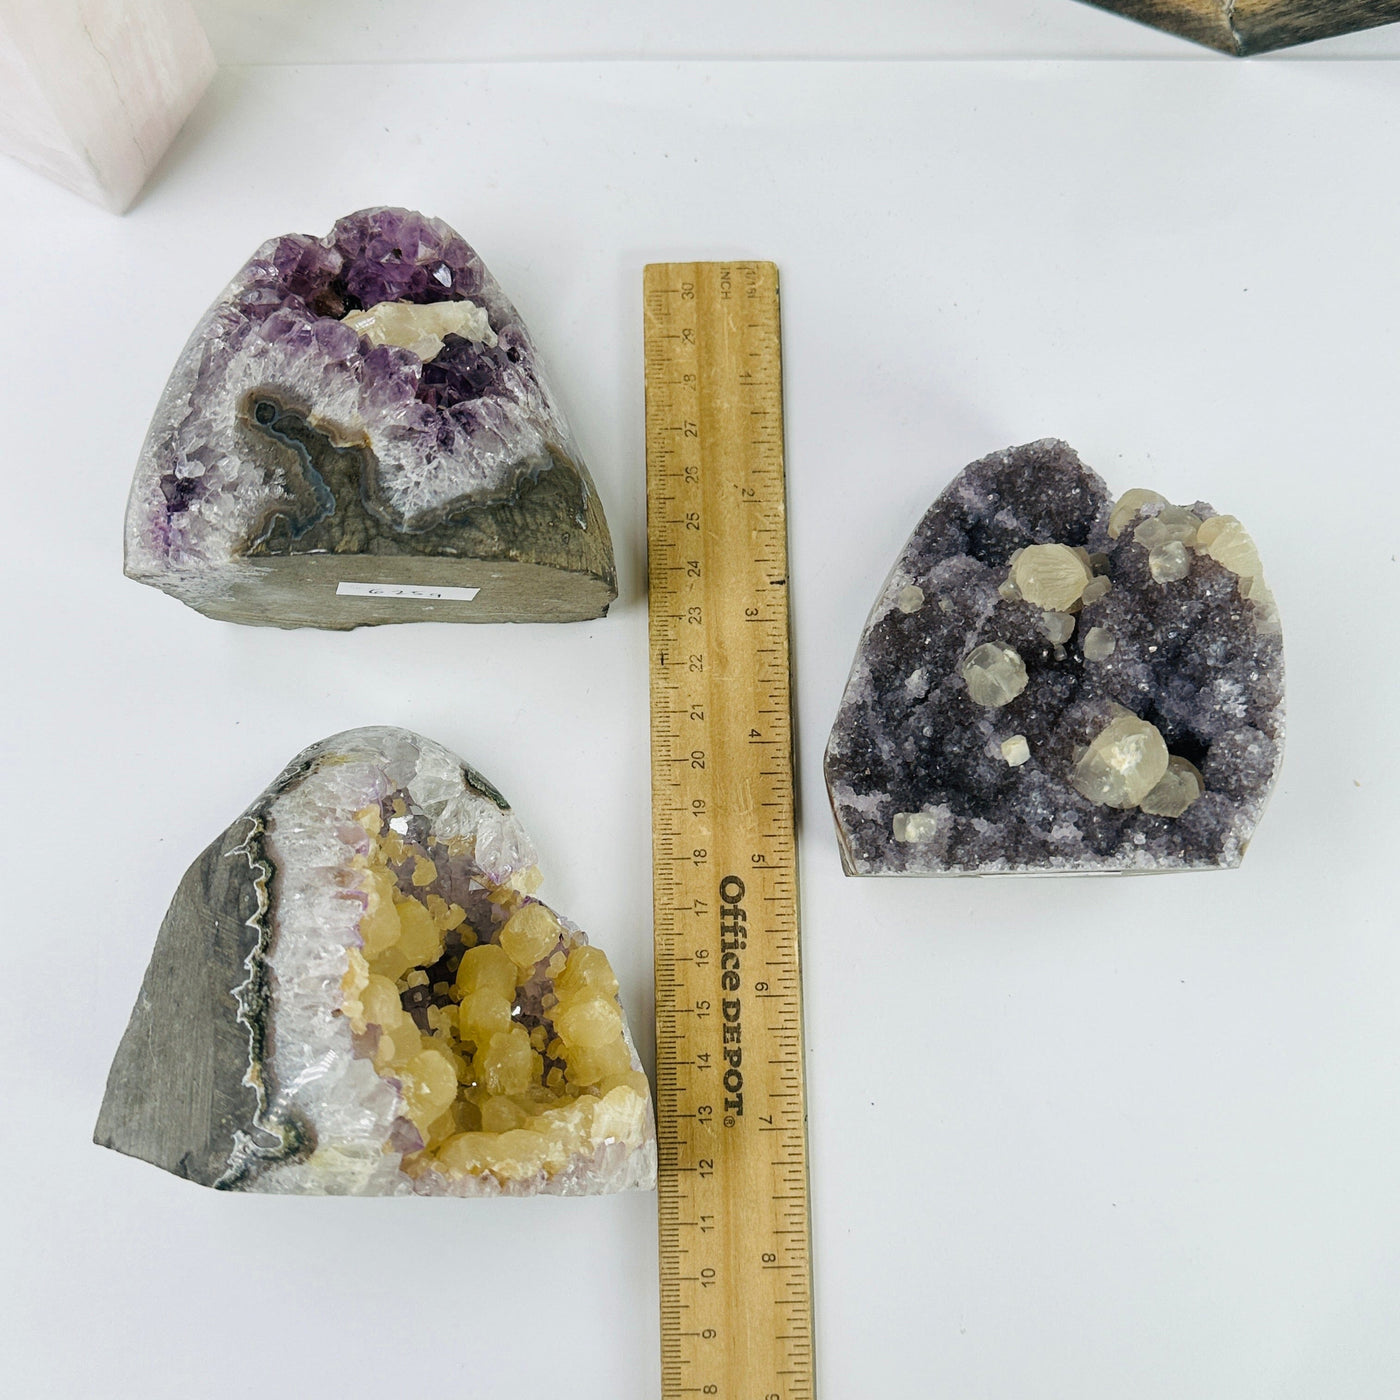 amethyst cut base next to a ruler for size reference